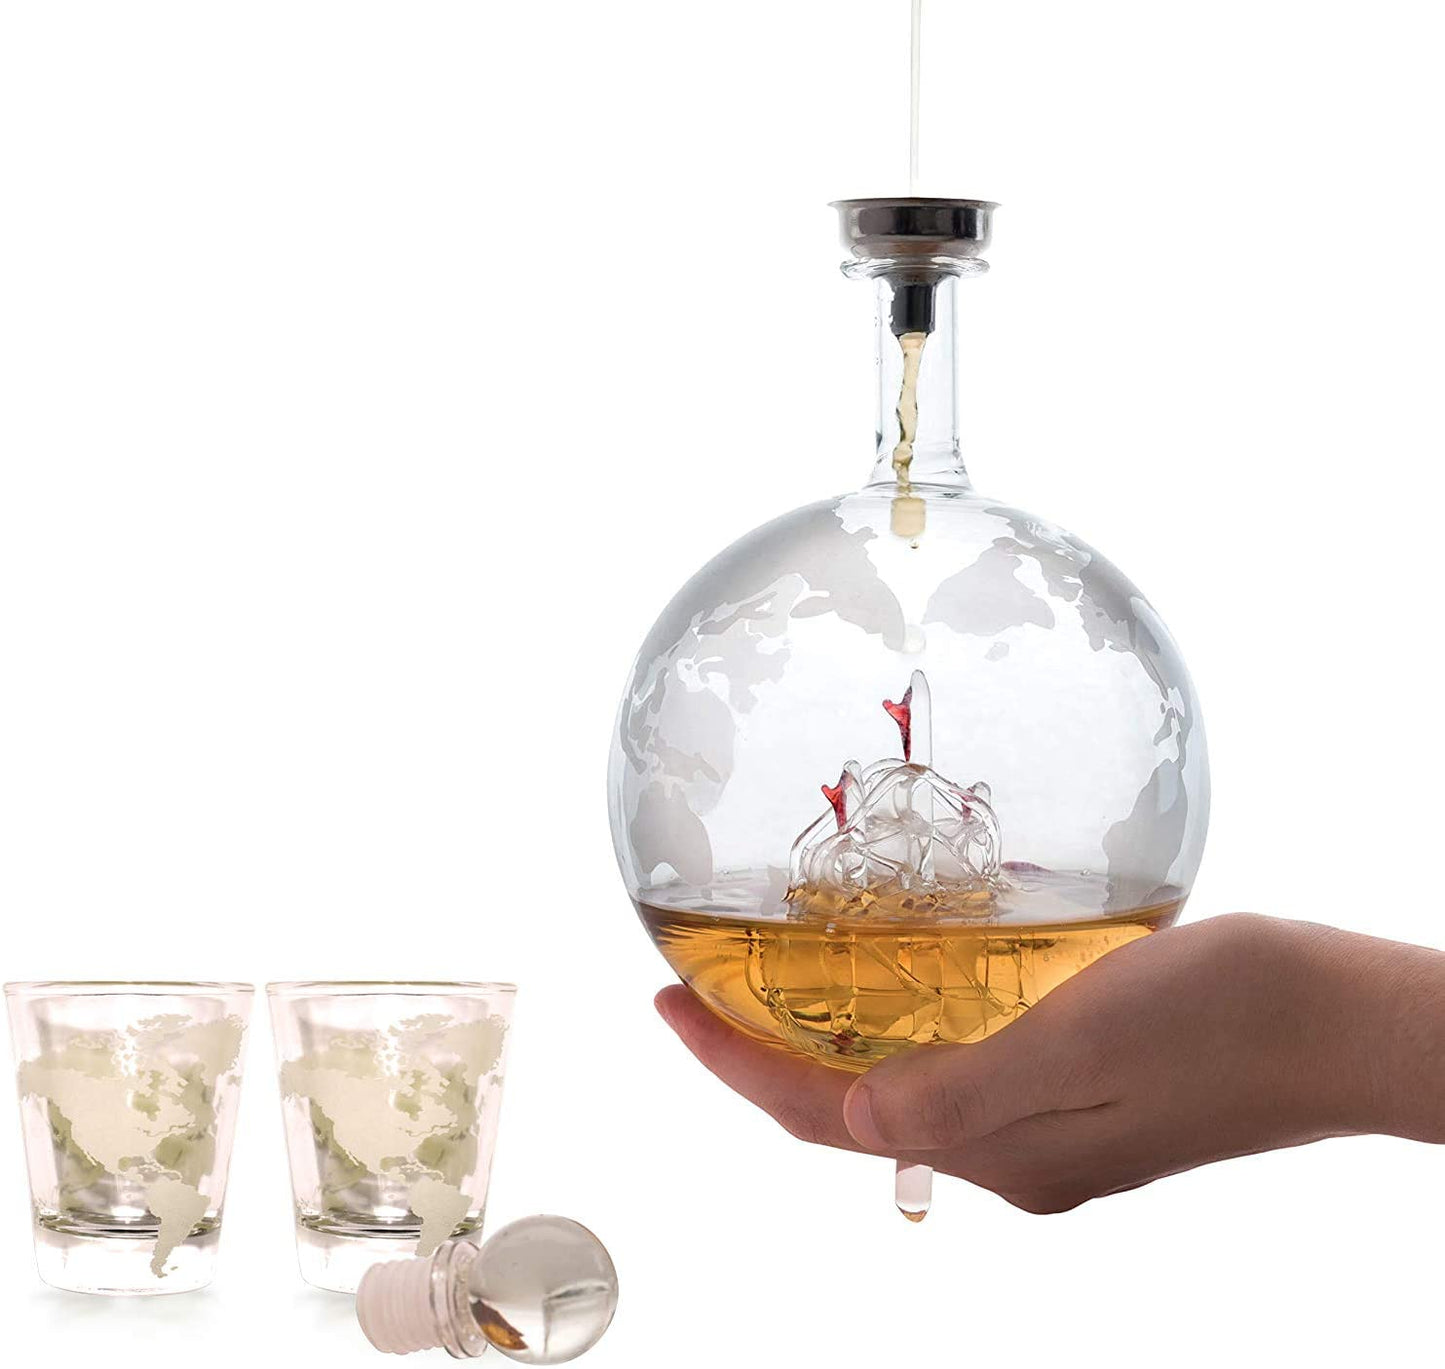 A persons hand is holding a whiskey decanter globe with a world map etched into the glass. There are 2 shot glasses nearby.